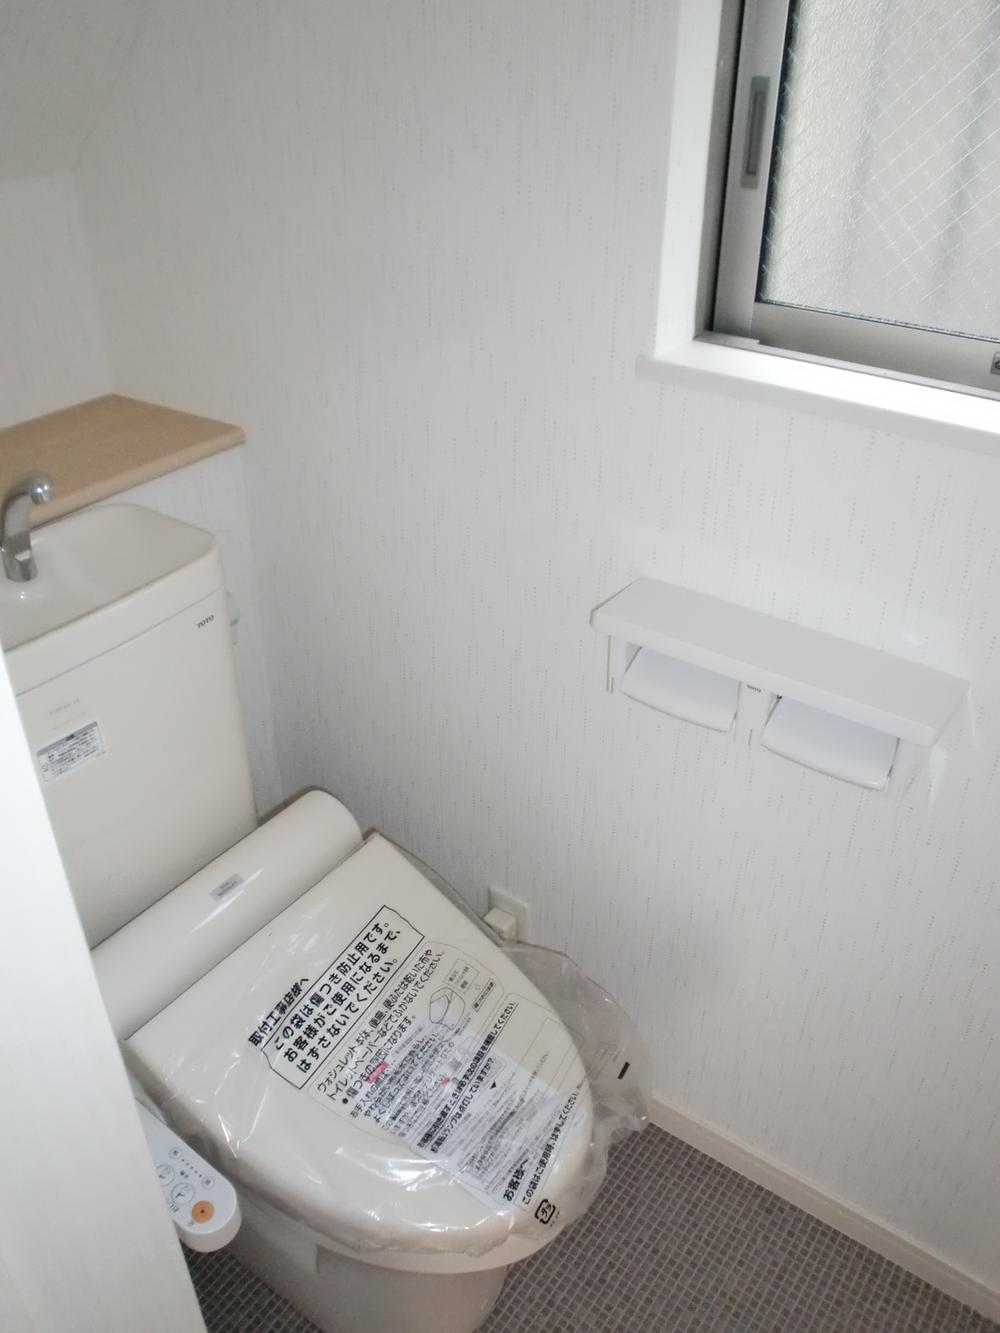 Toilet. It There is also available clean window.